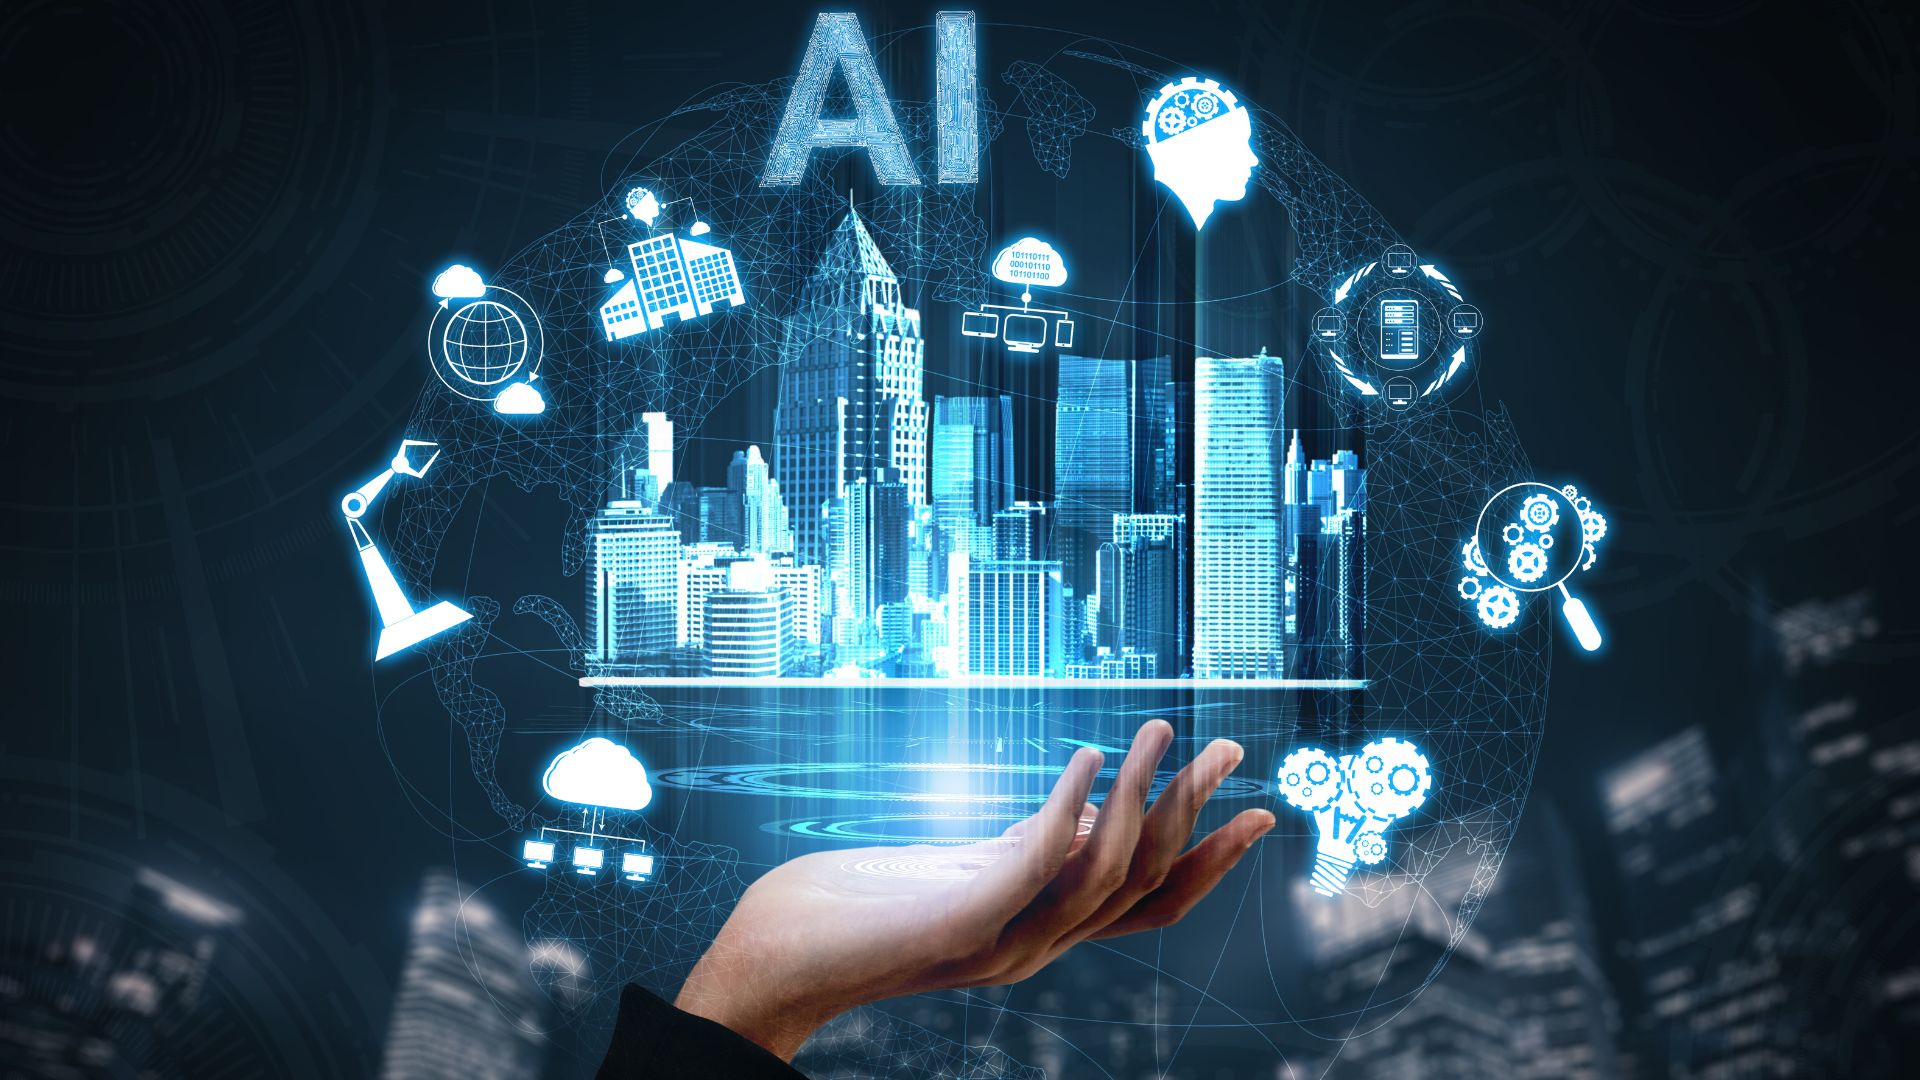 use cases of AI in real estate